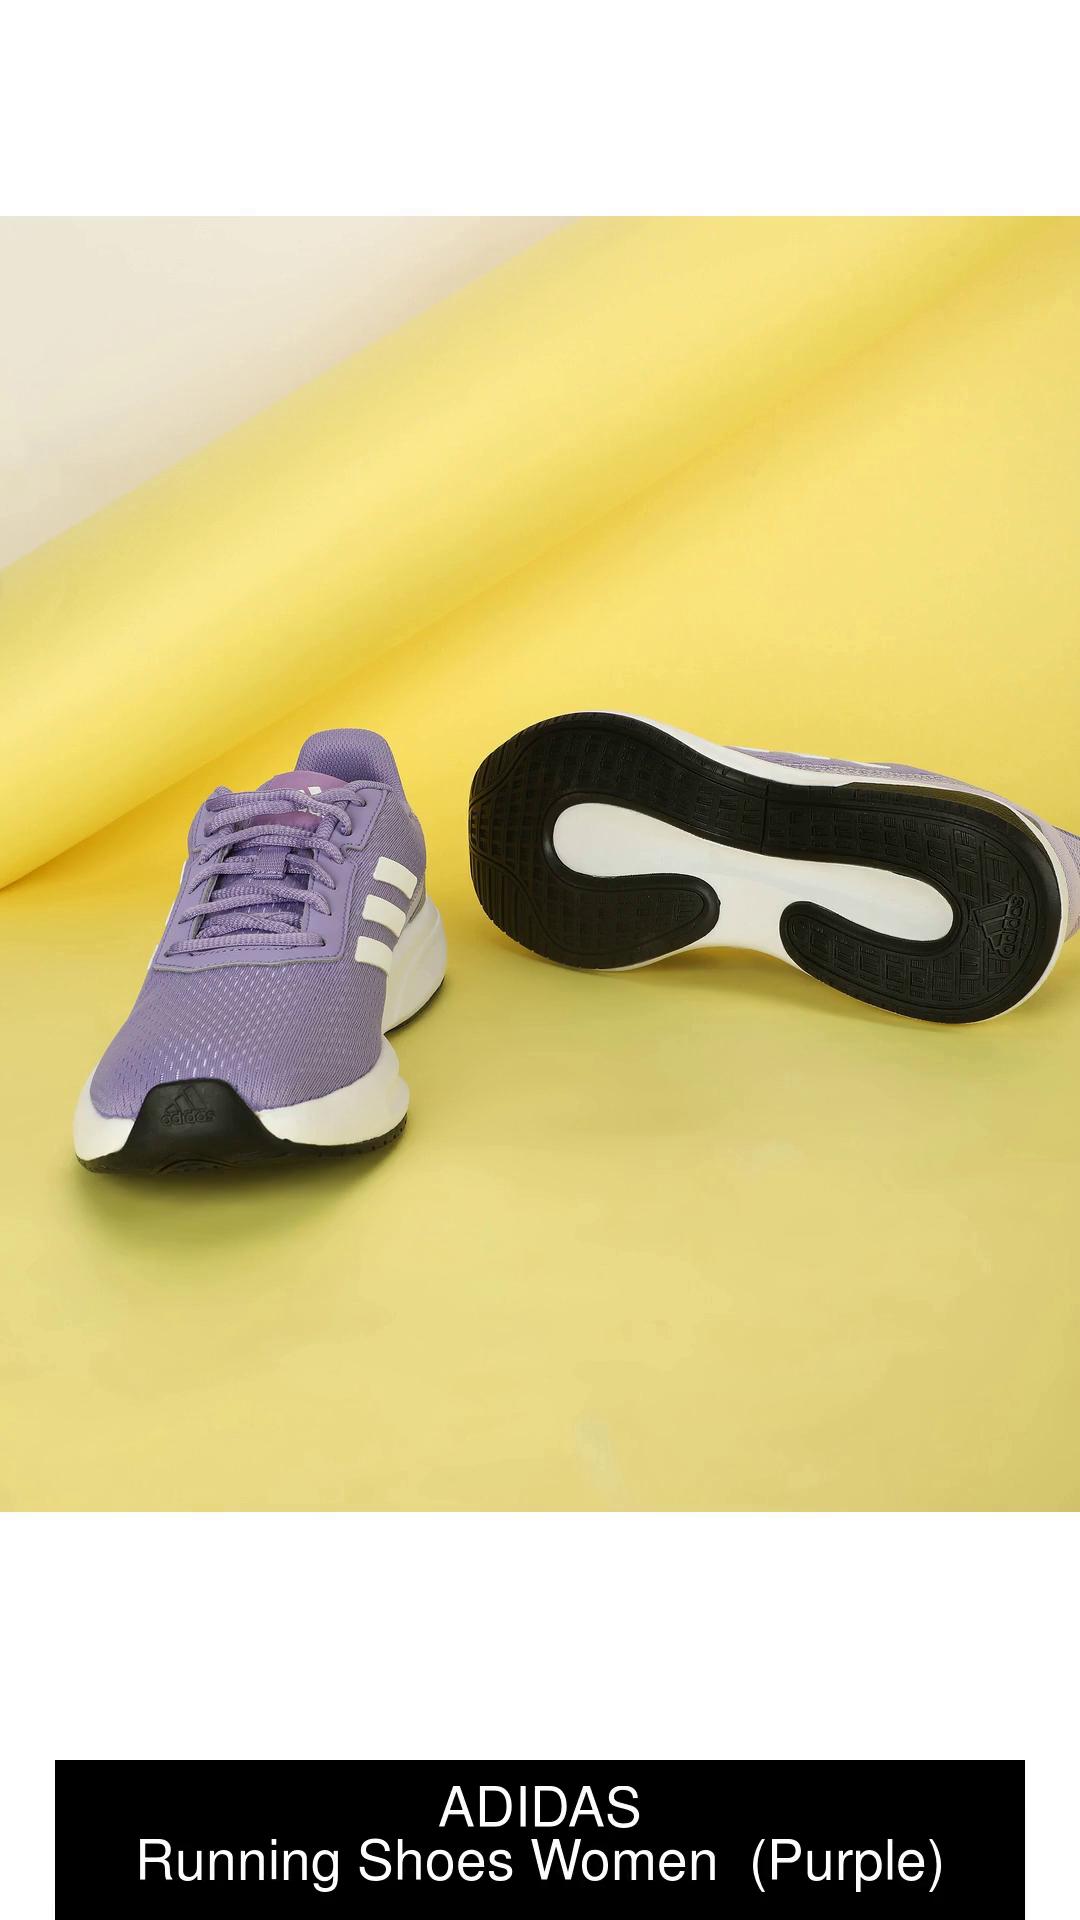 ADIDAS Runesy W Running For Women - Buy ADIDAS Runesy W Shoes For Women Online at Best Price - Shop Online for Footwears India | Flipkart.com